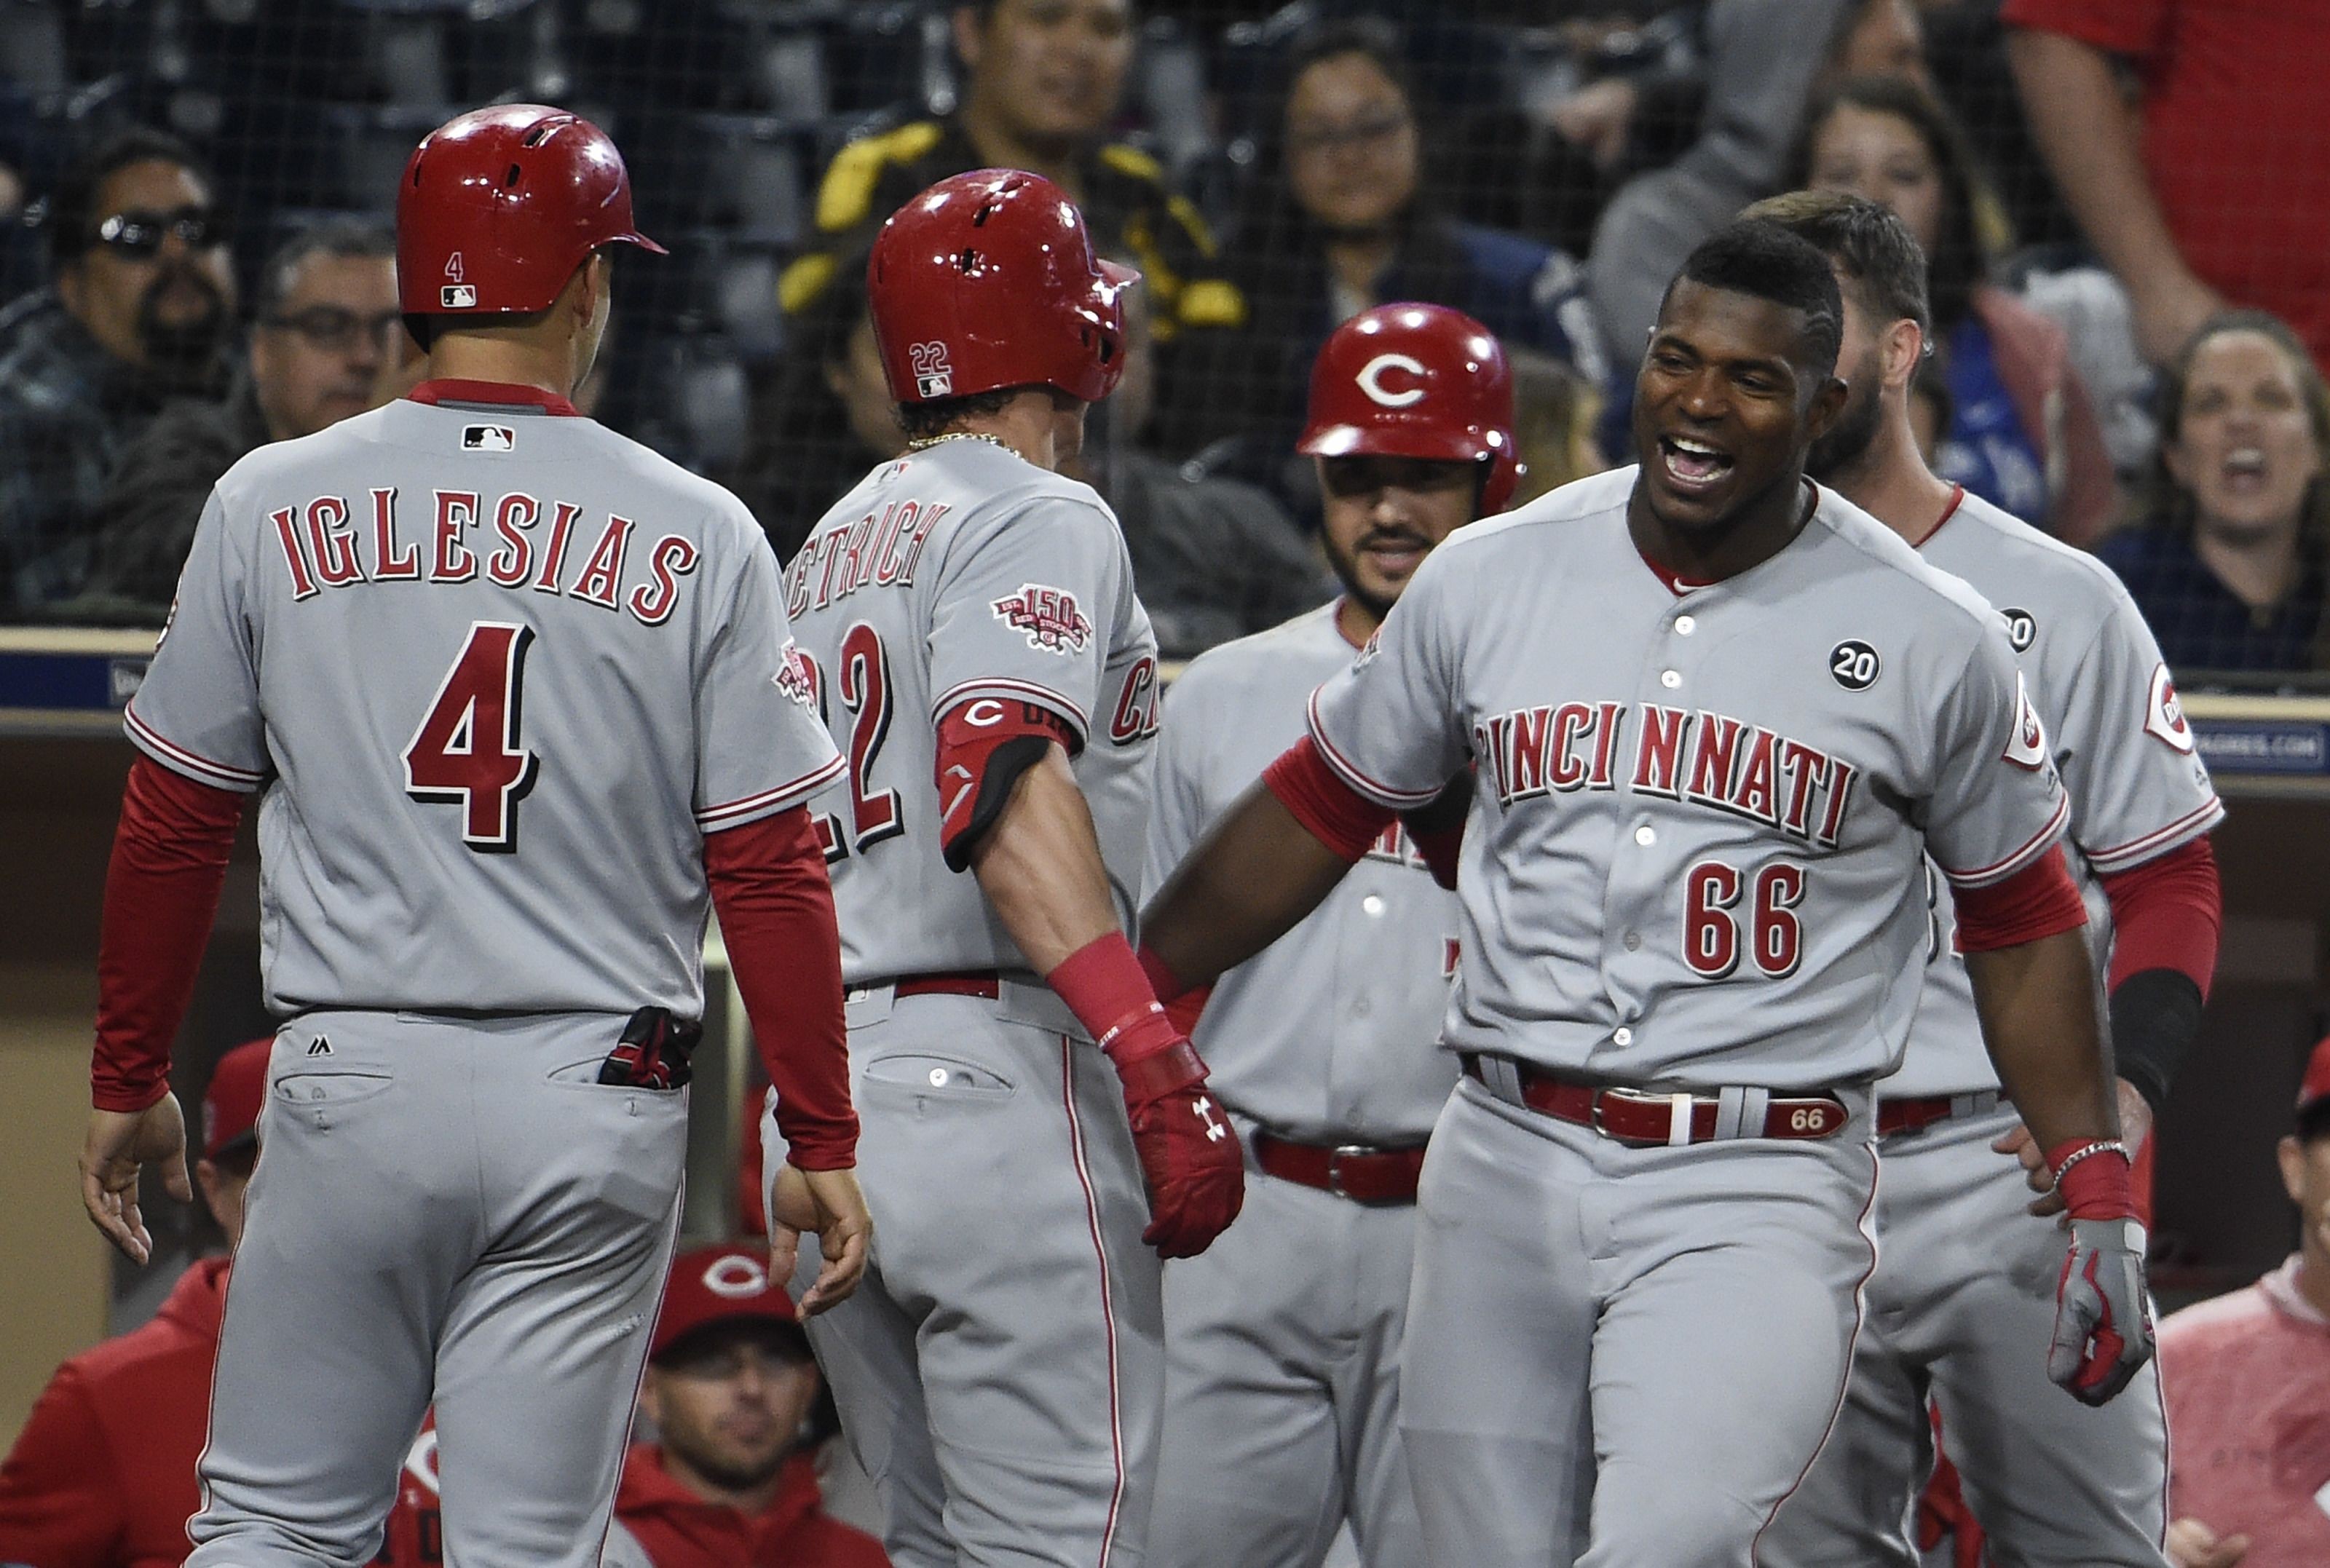 Cincinnati Reds 5 biggest surprises from the first 20 games of the season